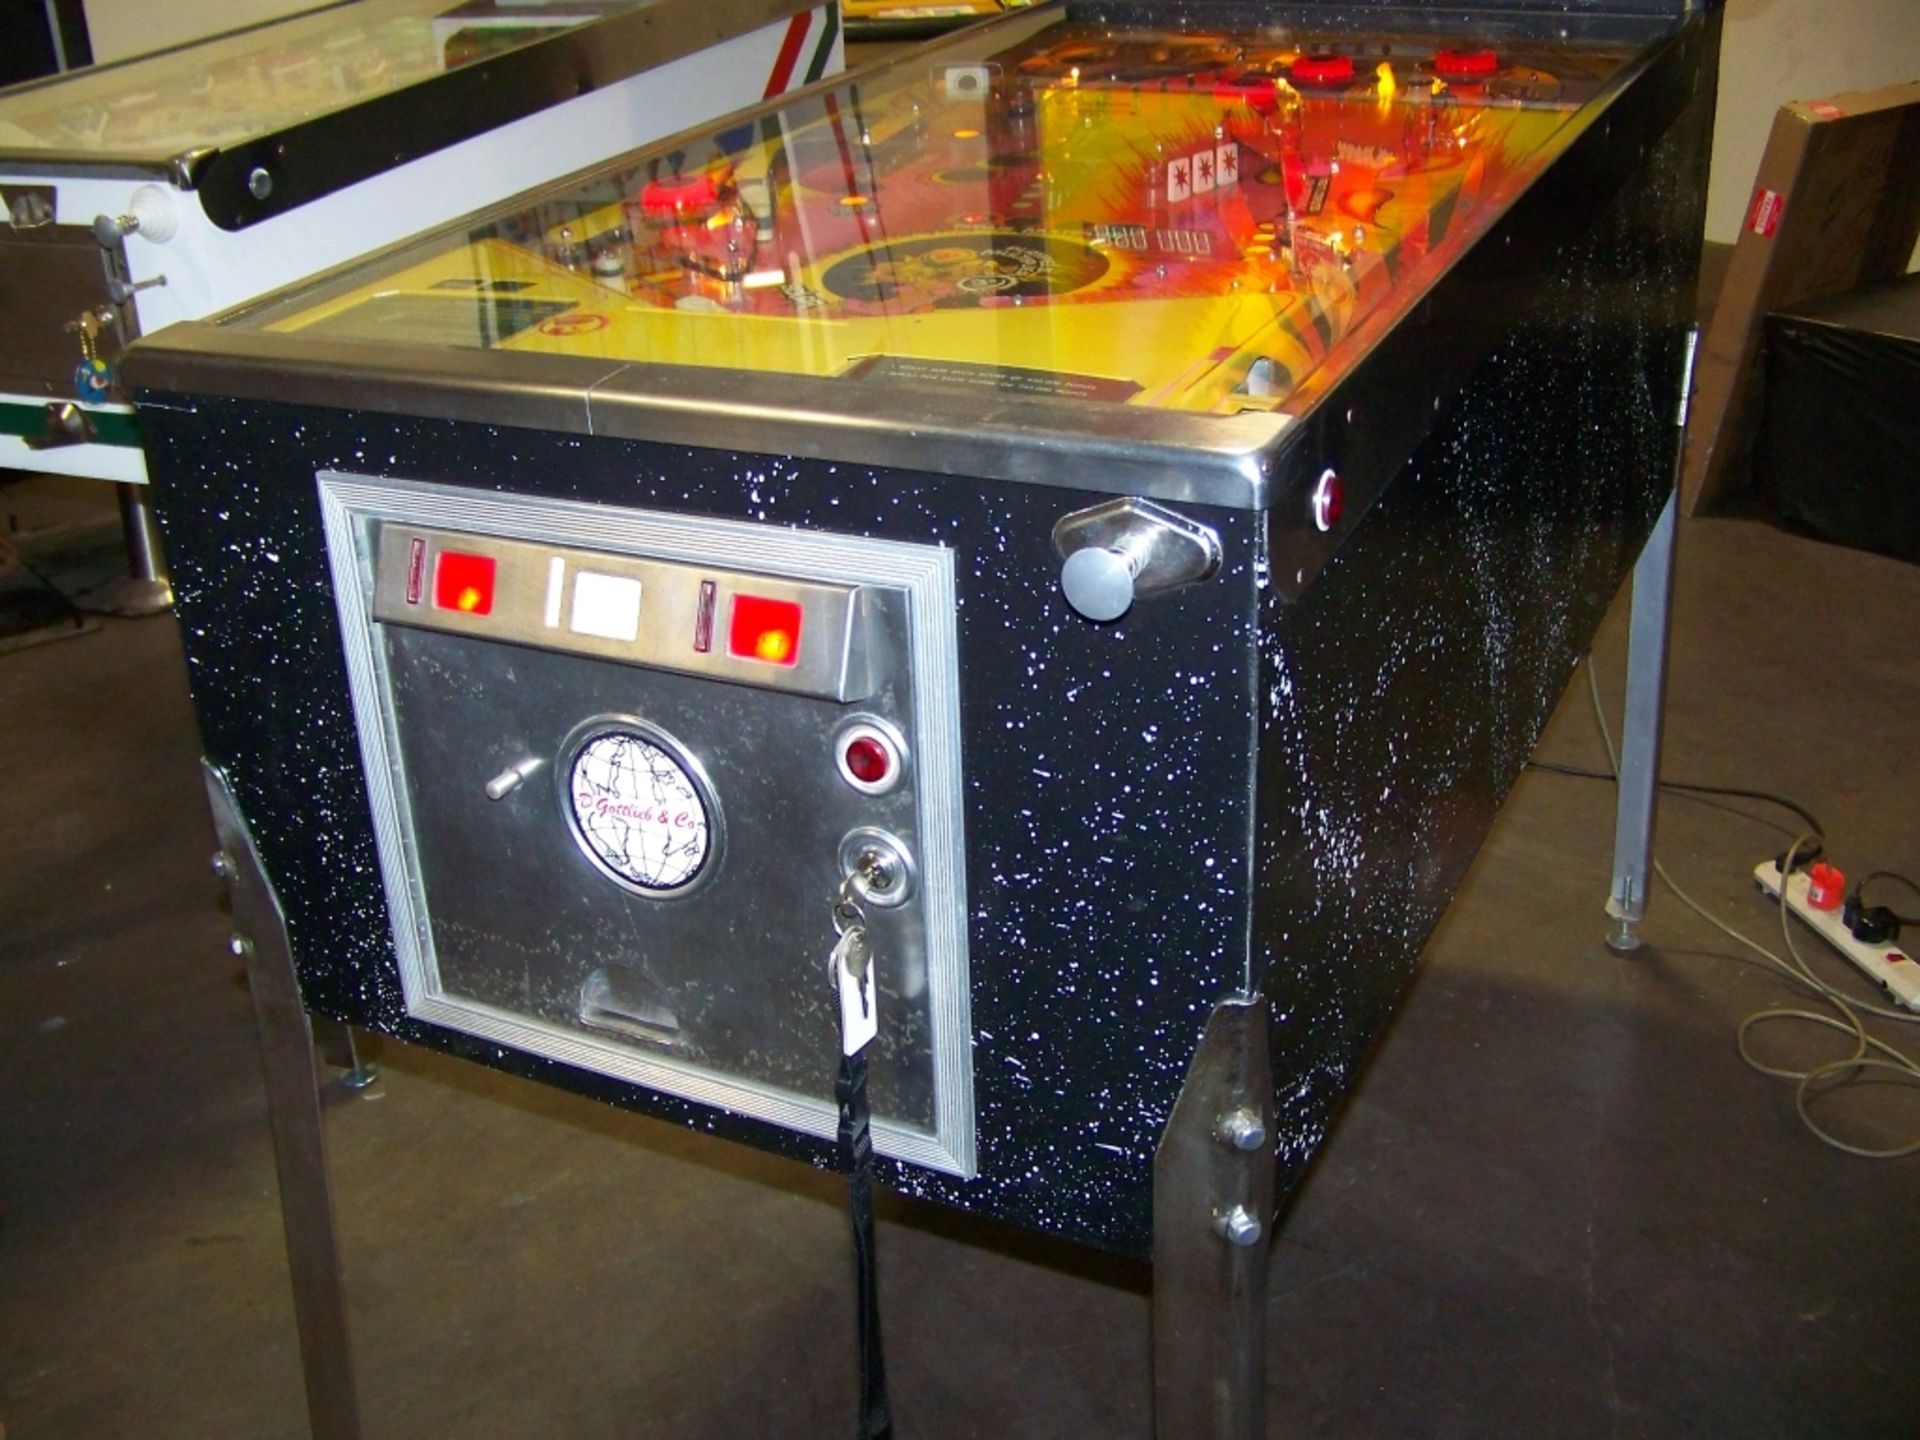 ECLIPSE PINBALL MACHINE RARE GOTTLIEB TITLE 1982 Item is in used condition. Evidence of wear and - Image 10 of 11